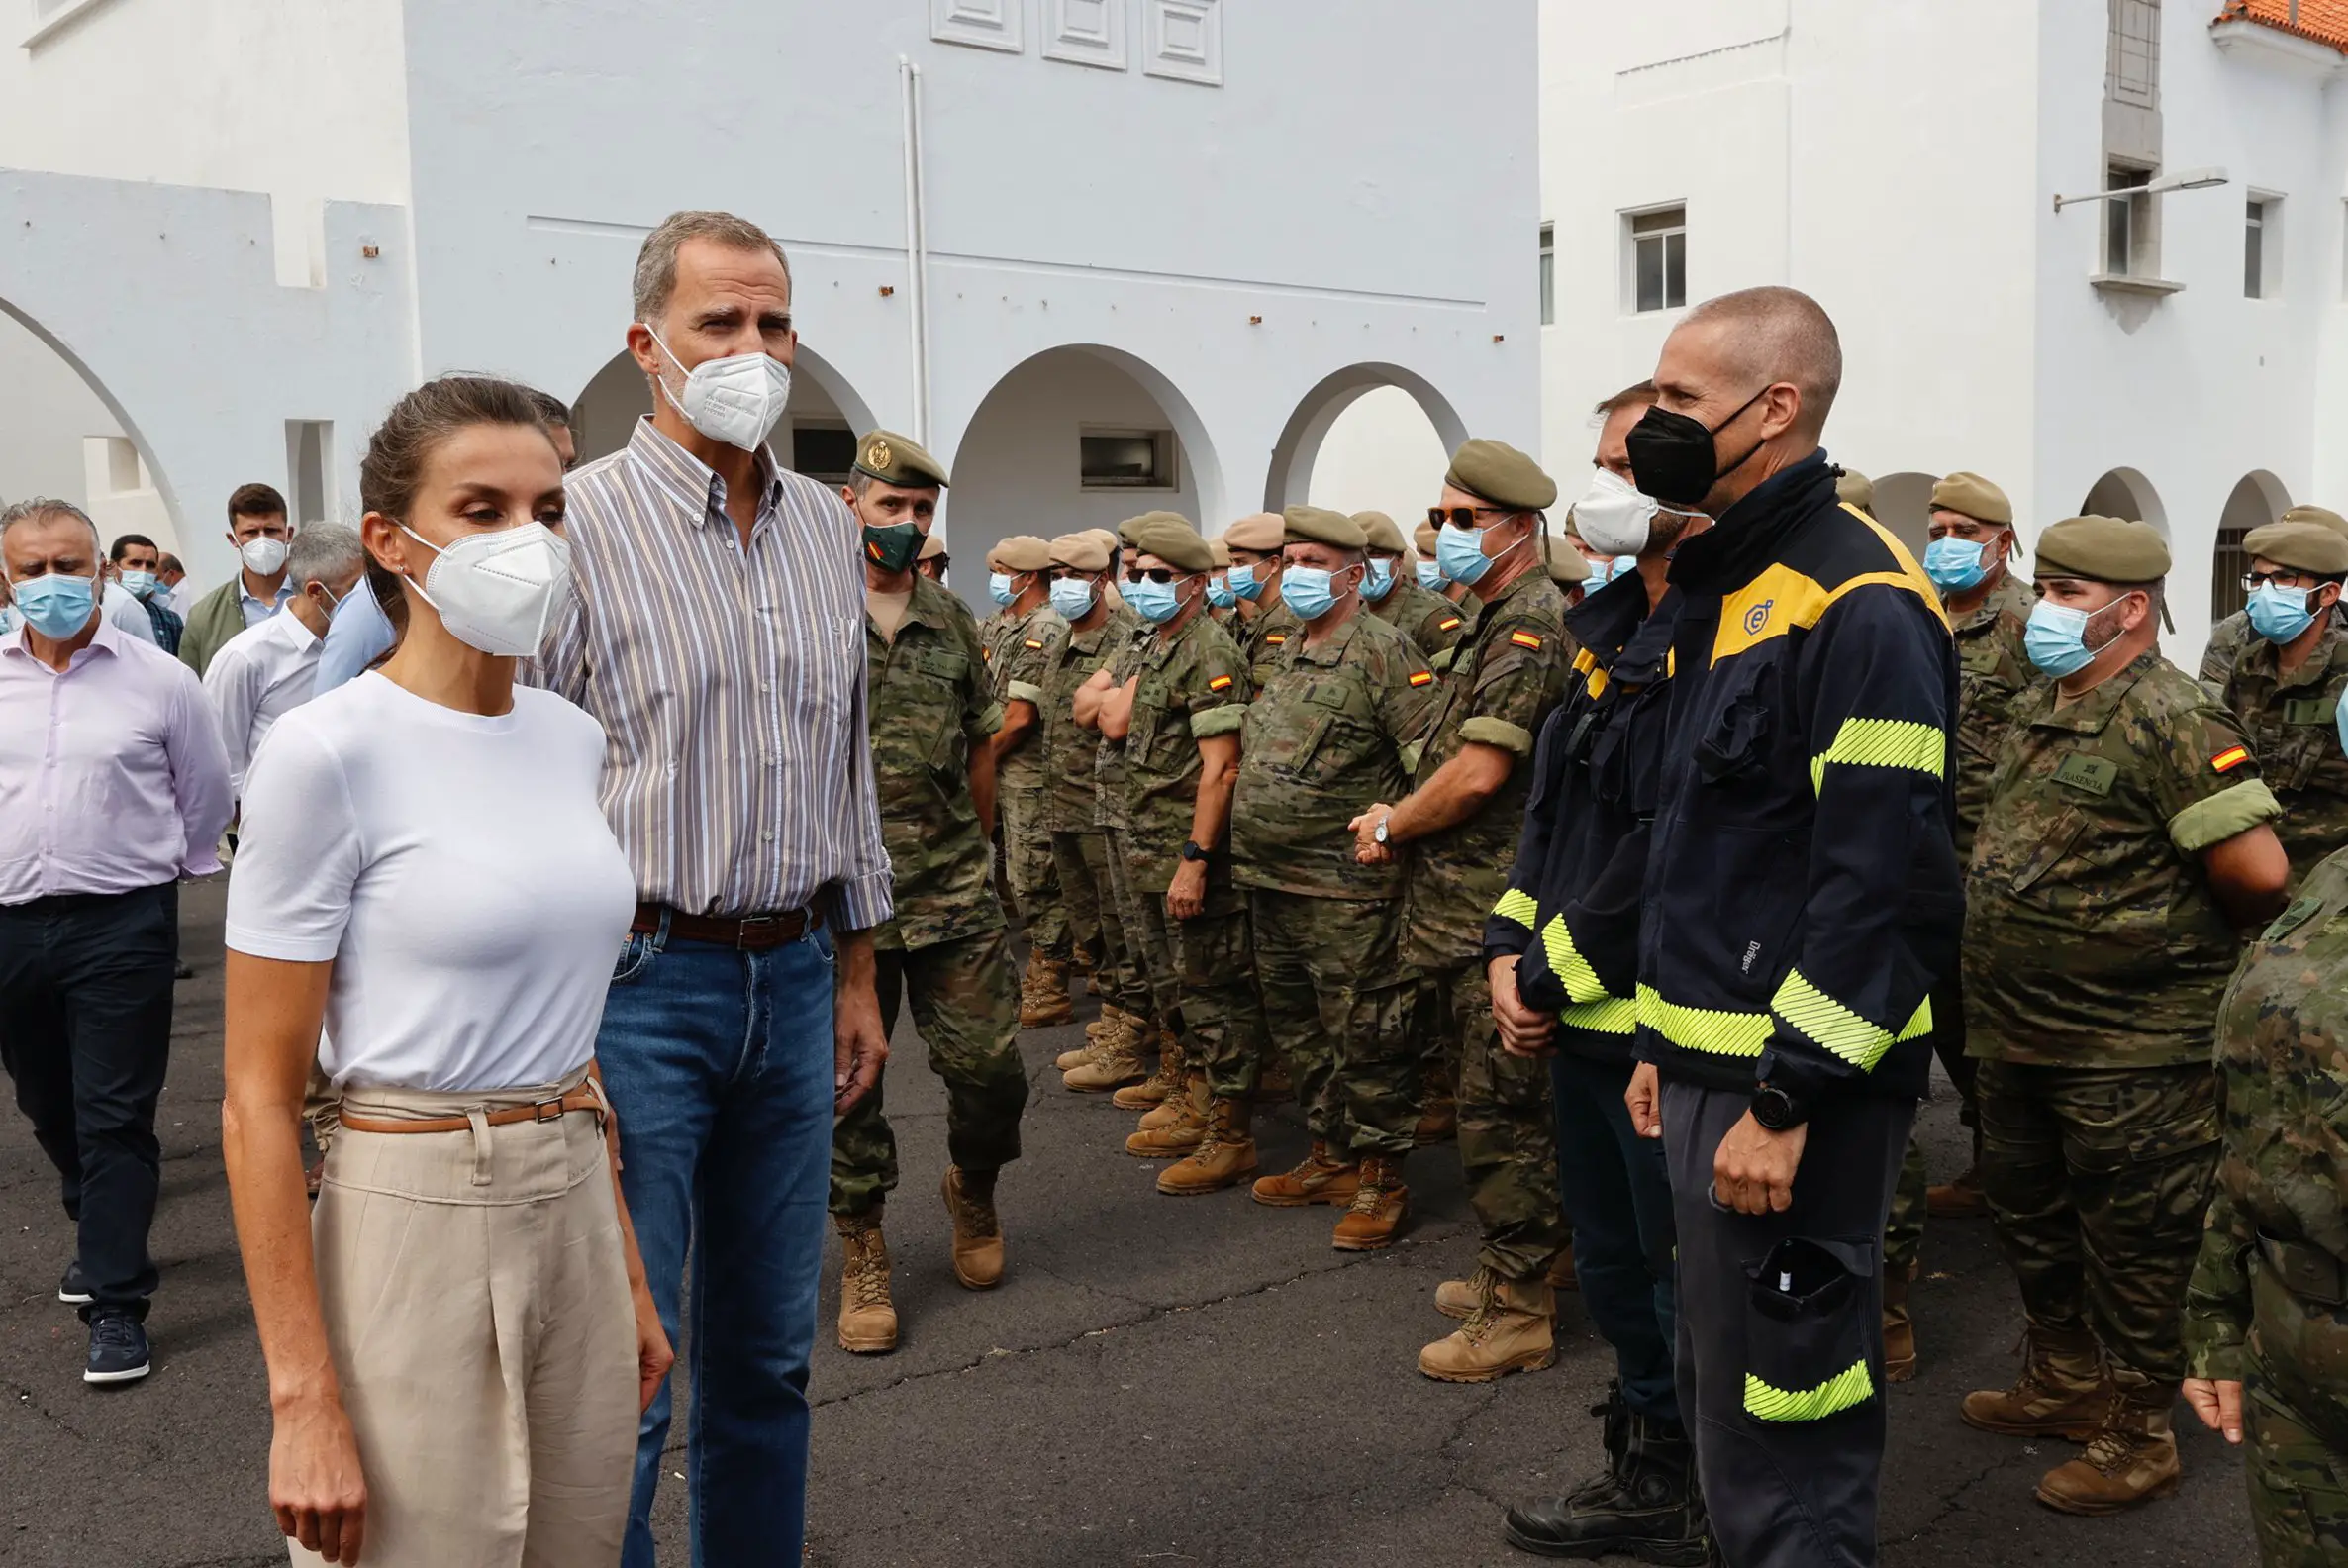 King Felipe and Queen Letizia visited Volcano Impacted Areas in Palma